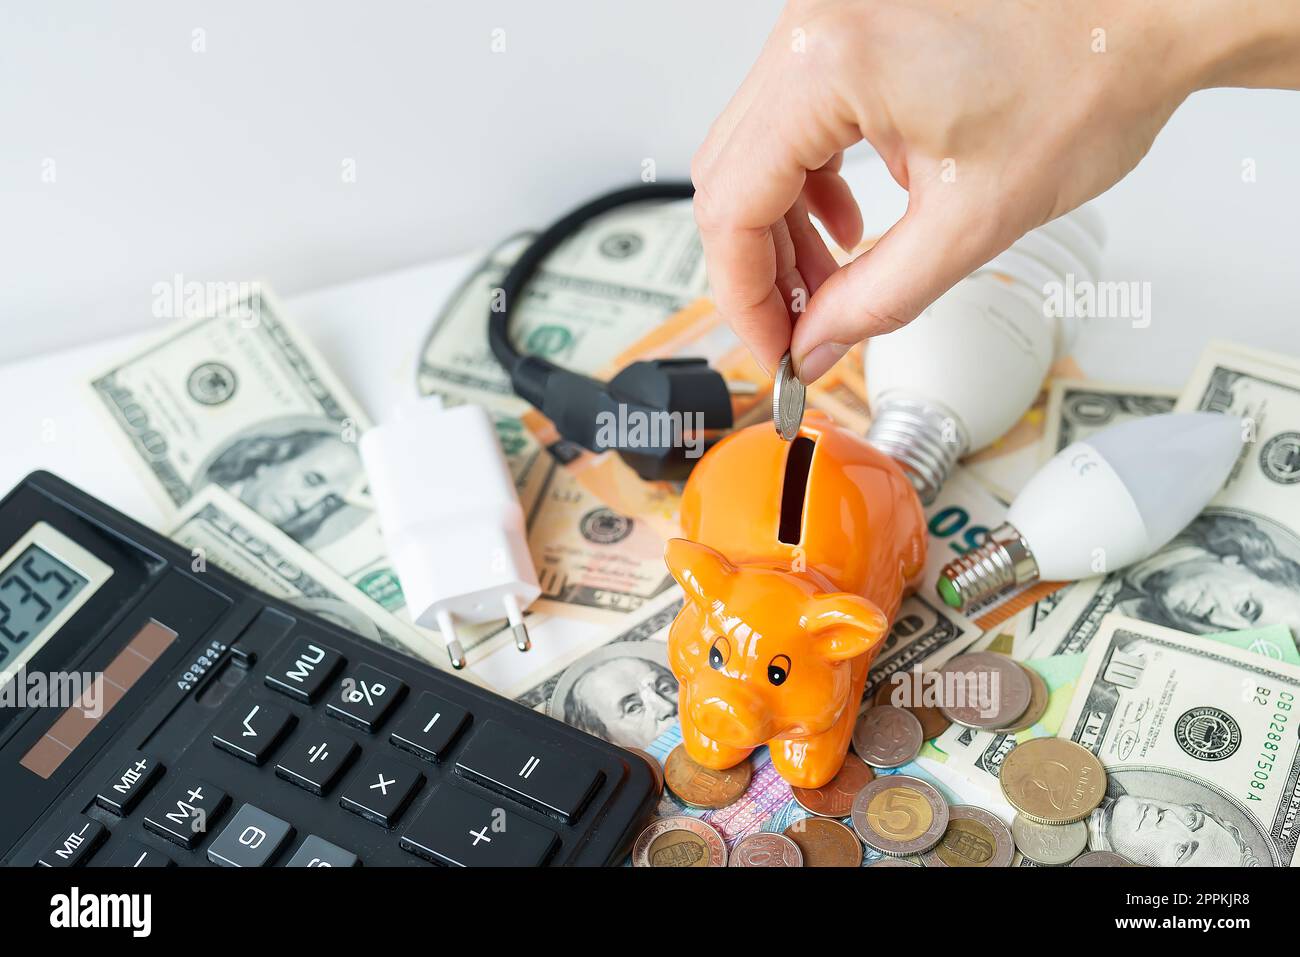 A woman's hand puts a coin in an orange piggy bank in the form of a pig, saving money. Calculator, euro and dollar banknotes, coins. Tax time, bill payment, calculator for counting. Stock Photo